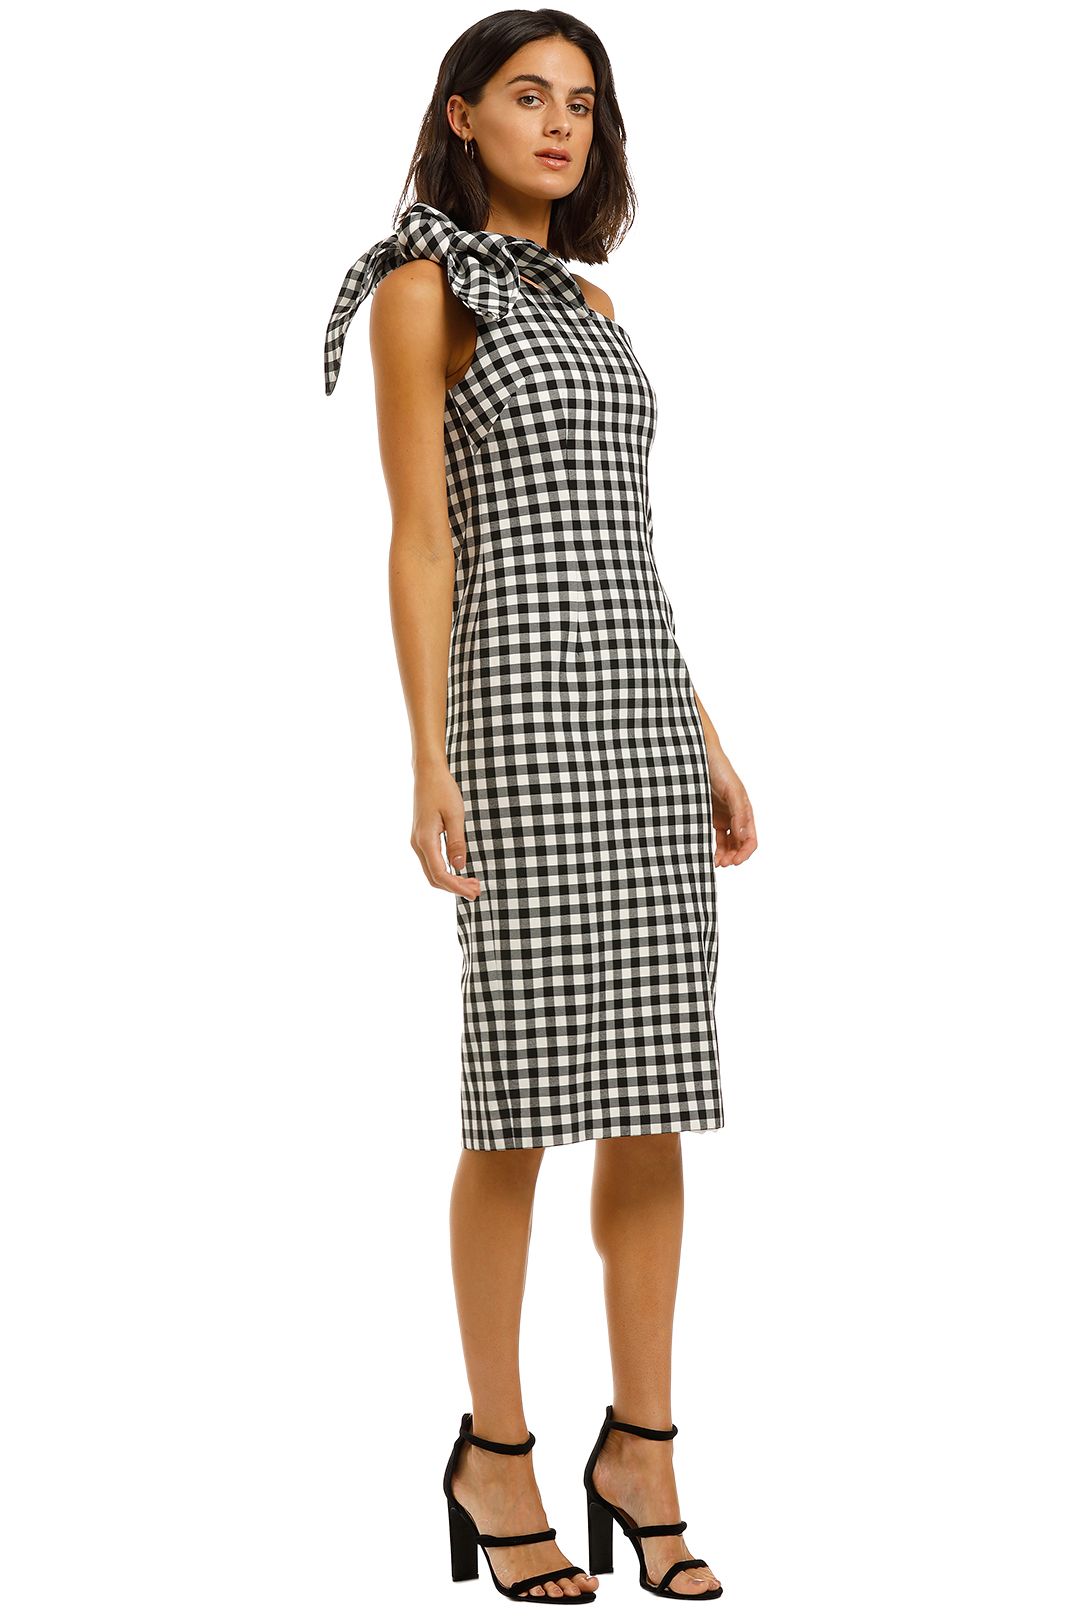 By-Johnny-Georgie-Gingham-Tie-Midi-Black-and-White-Side